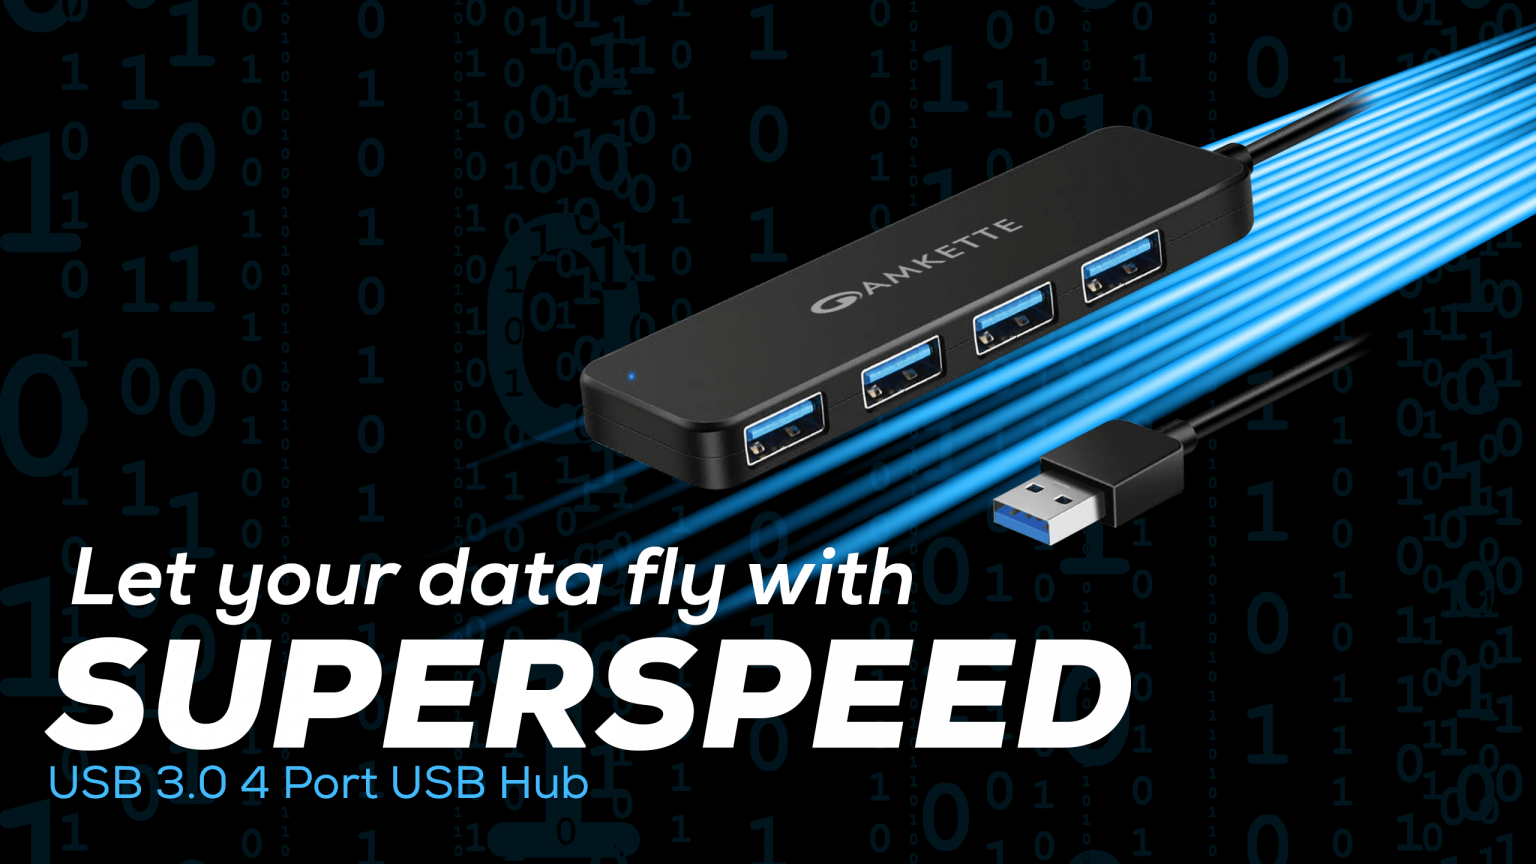 Let your data fly with Superspeed USB 3.0 4 Port USB Hub